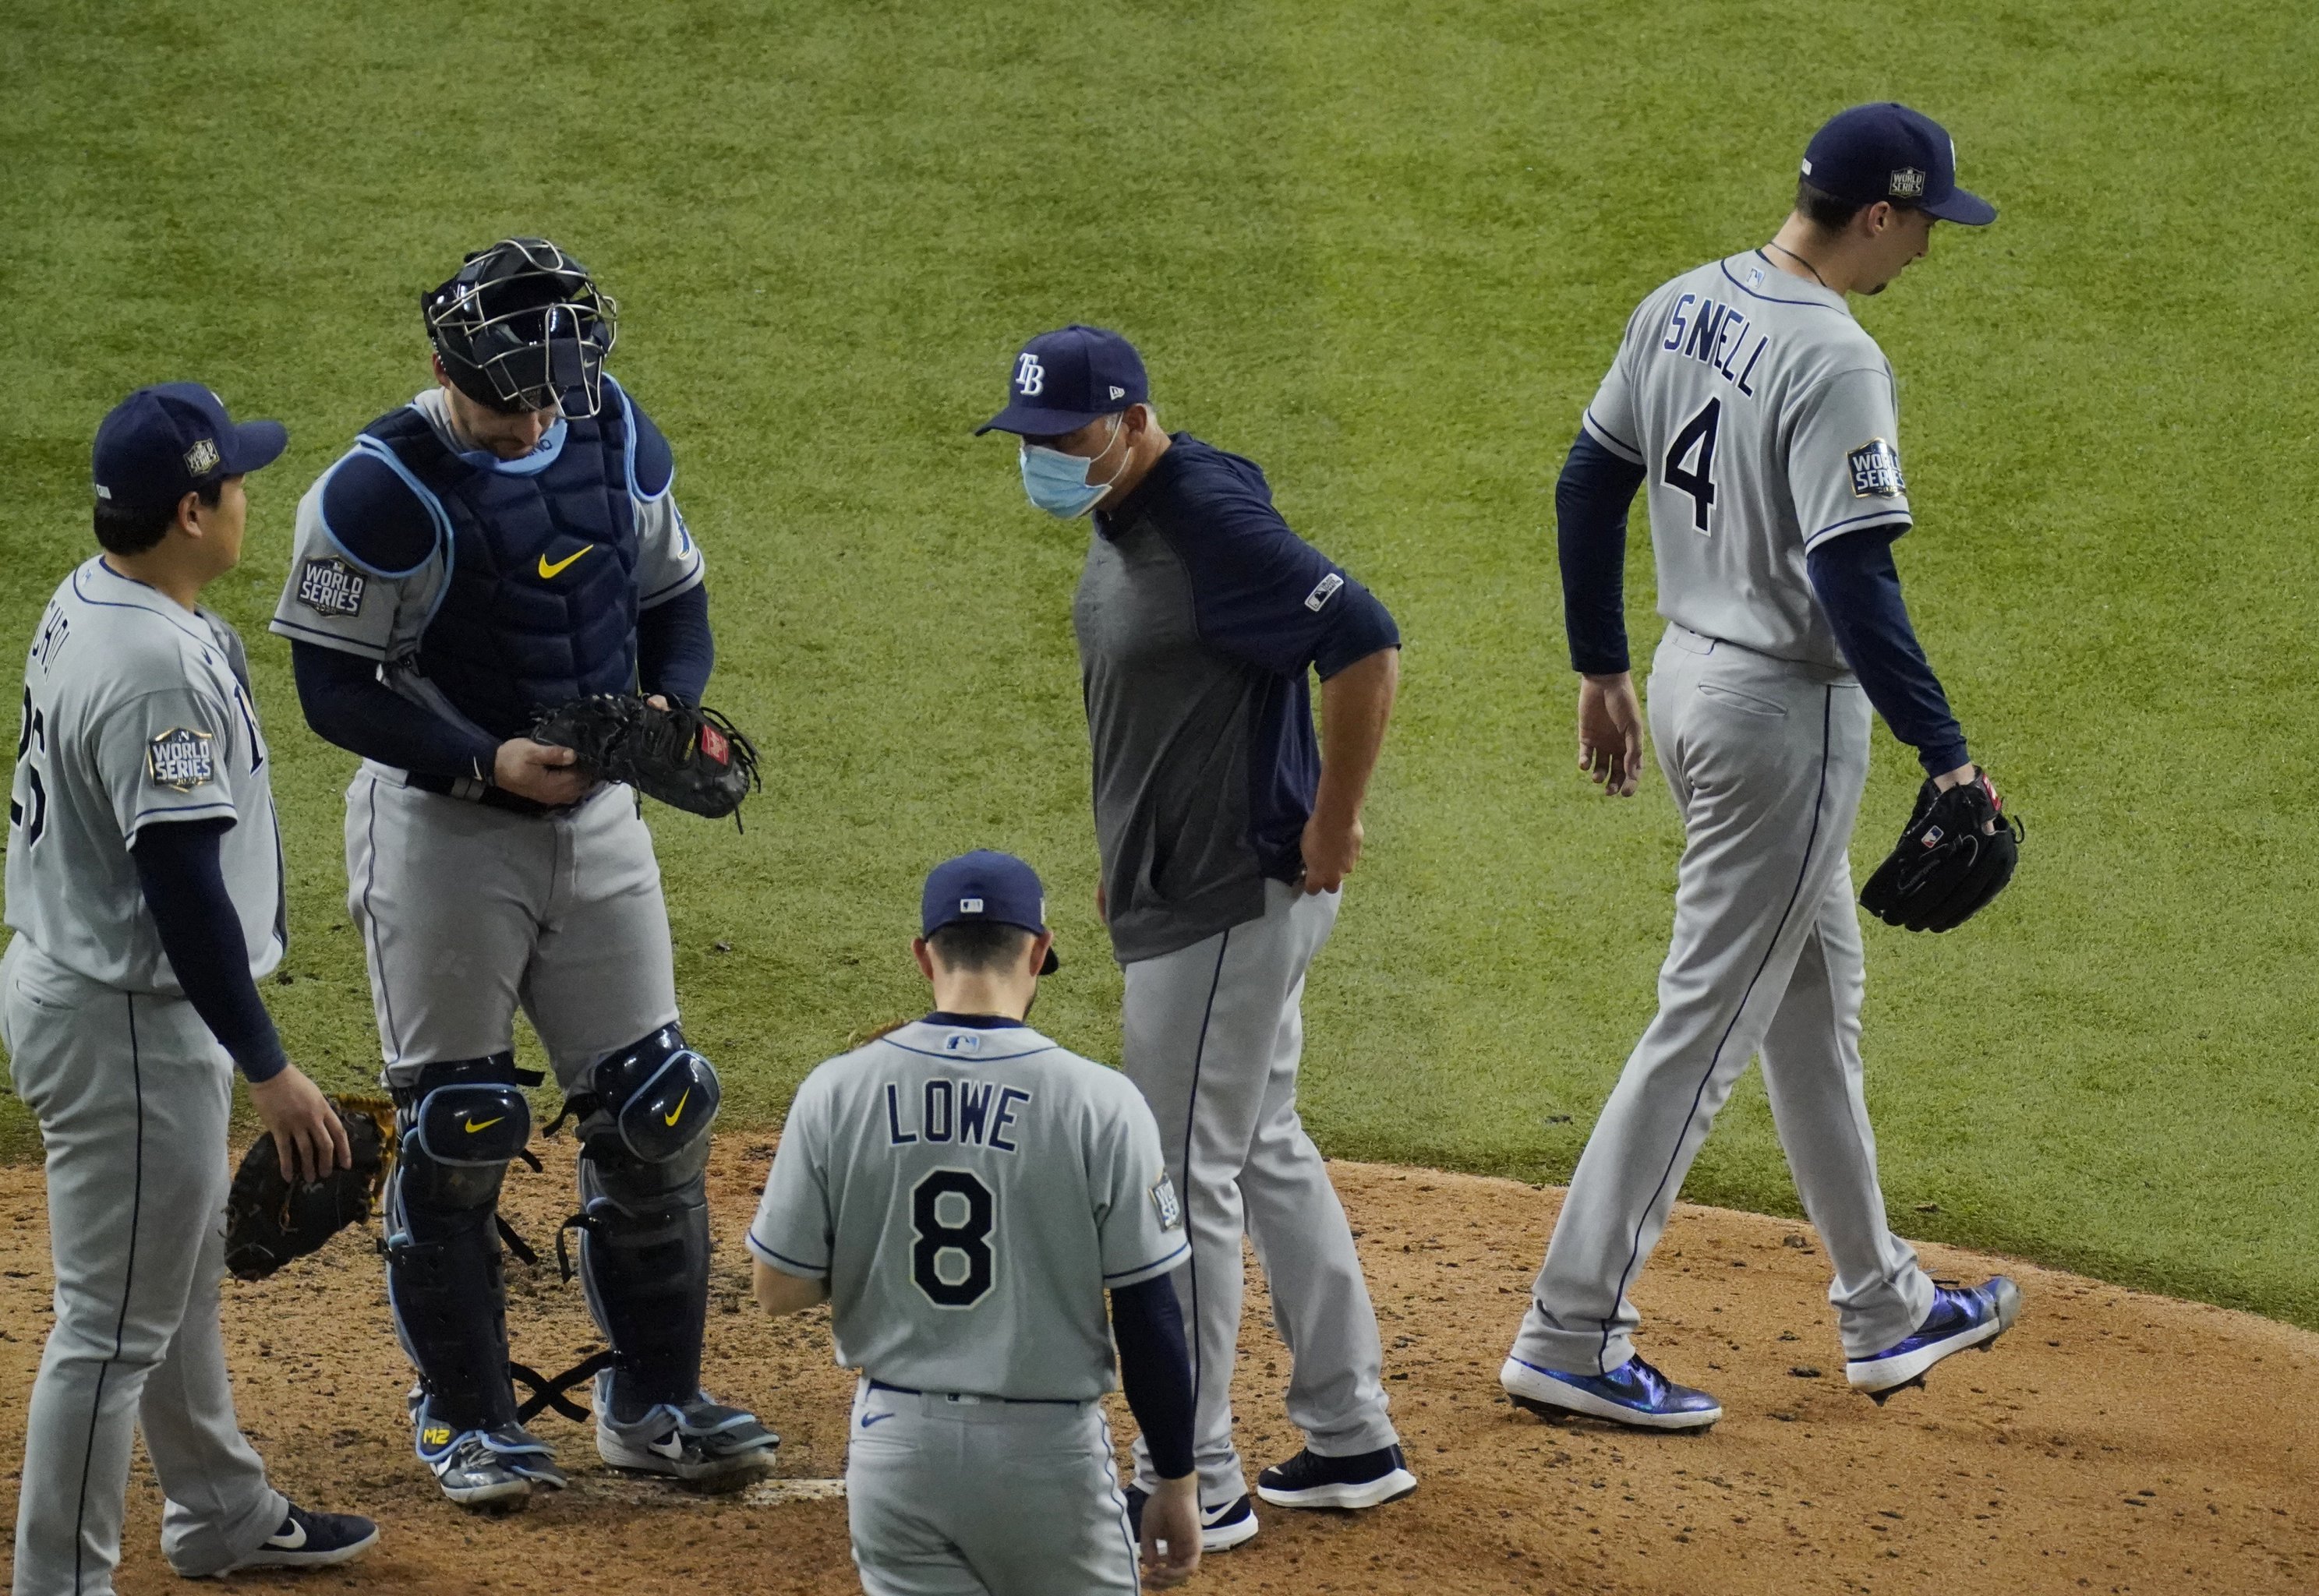 Lance Lynn's home run problems continue in Dodgers' blowout loss to Marlins